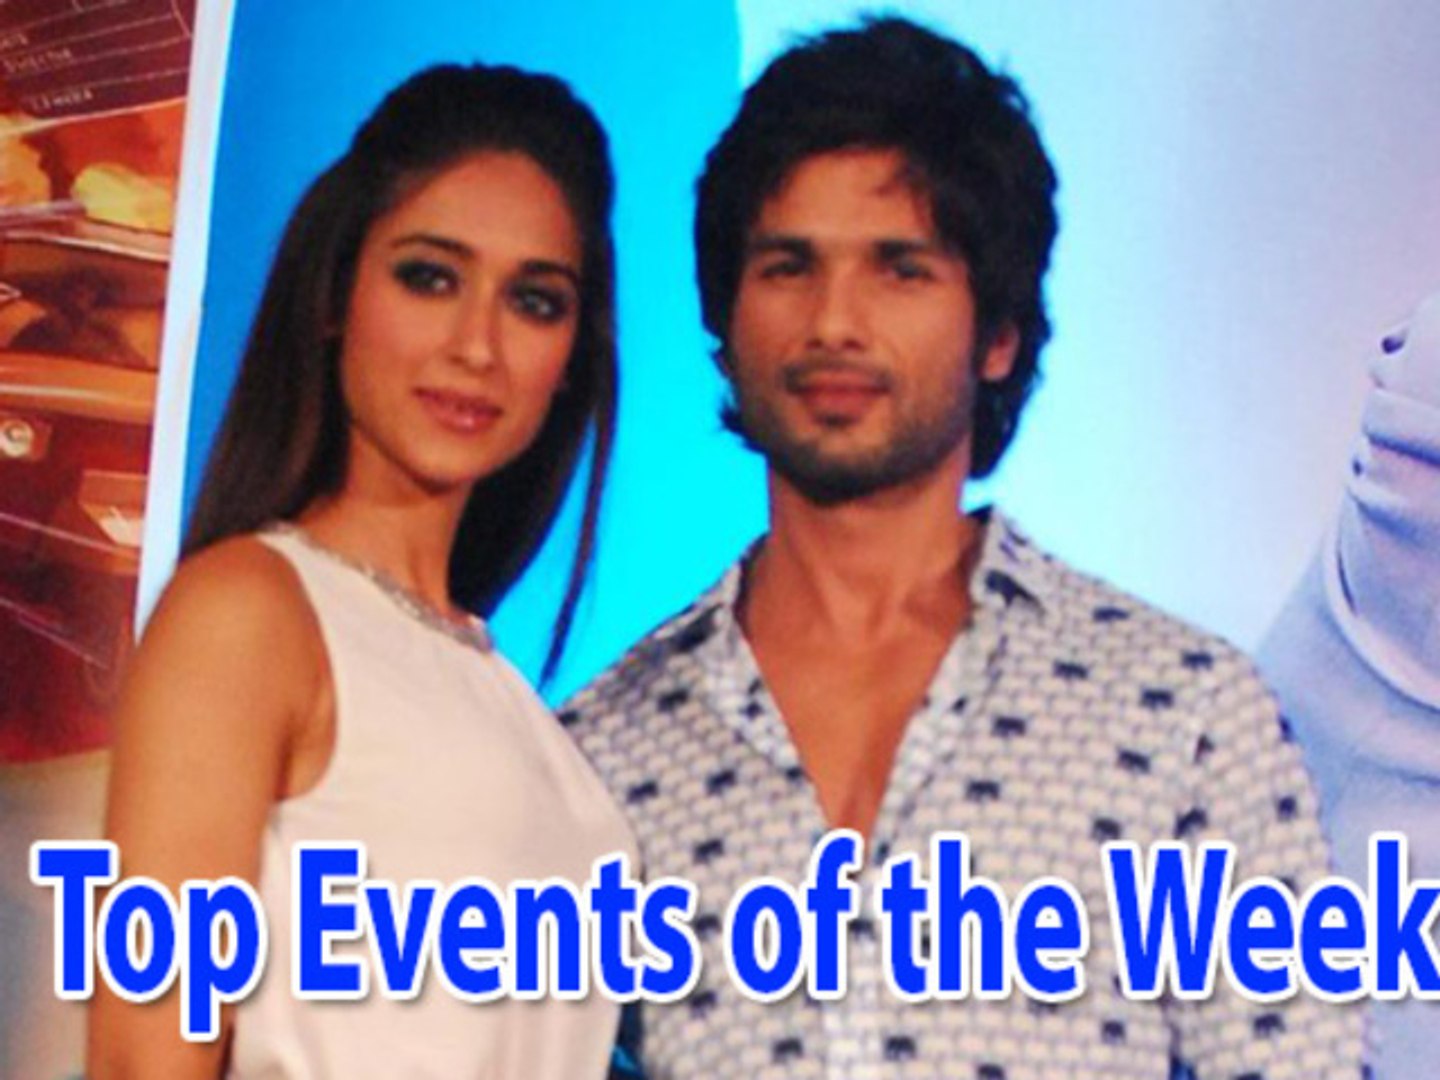 Best Events Of The Week First Look Phata Poster Nikala Hero Shahid Kapoor and Ileana Dcruz and More 